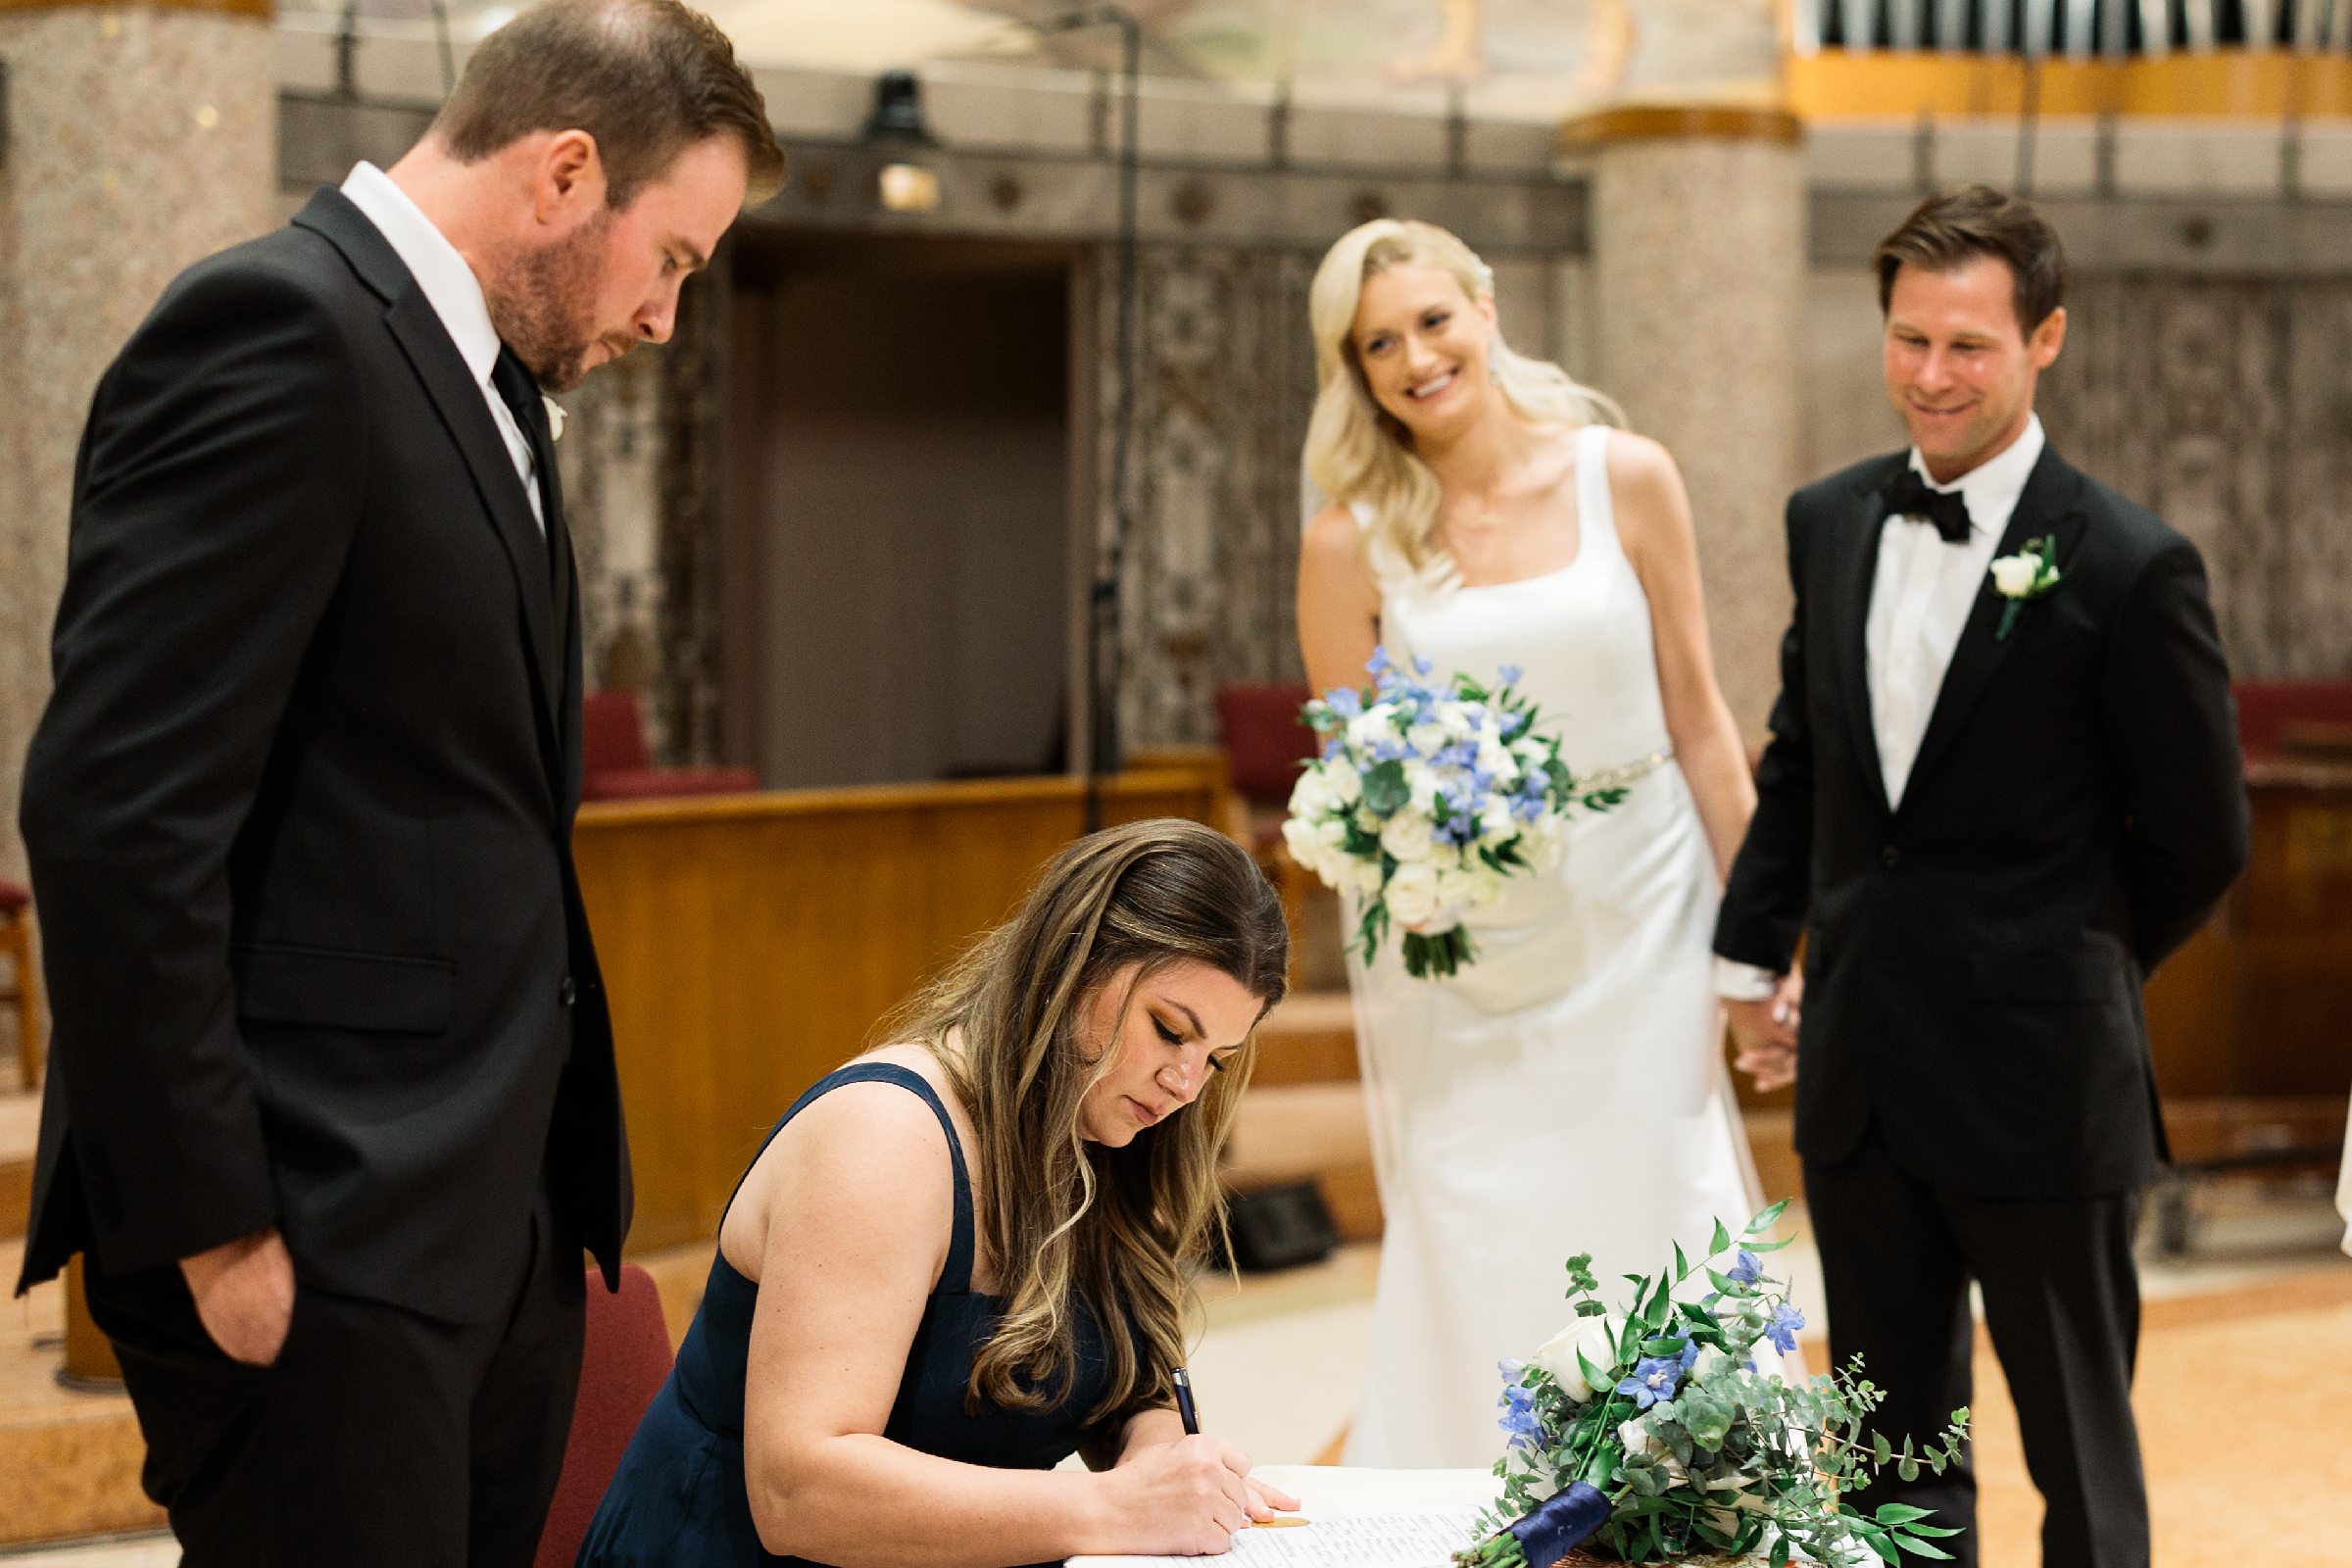 Bridesmaid and groomsmen sign as witnesses to marriage certificate, bride and groom hold hands and watch by Detroit Wedding Photographer Michele Maloney 